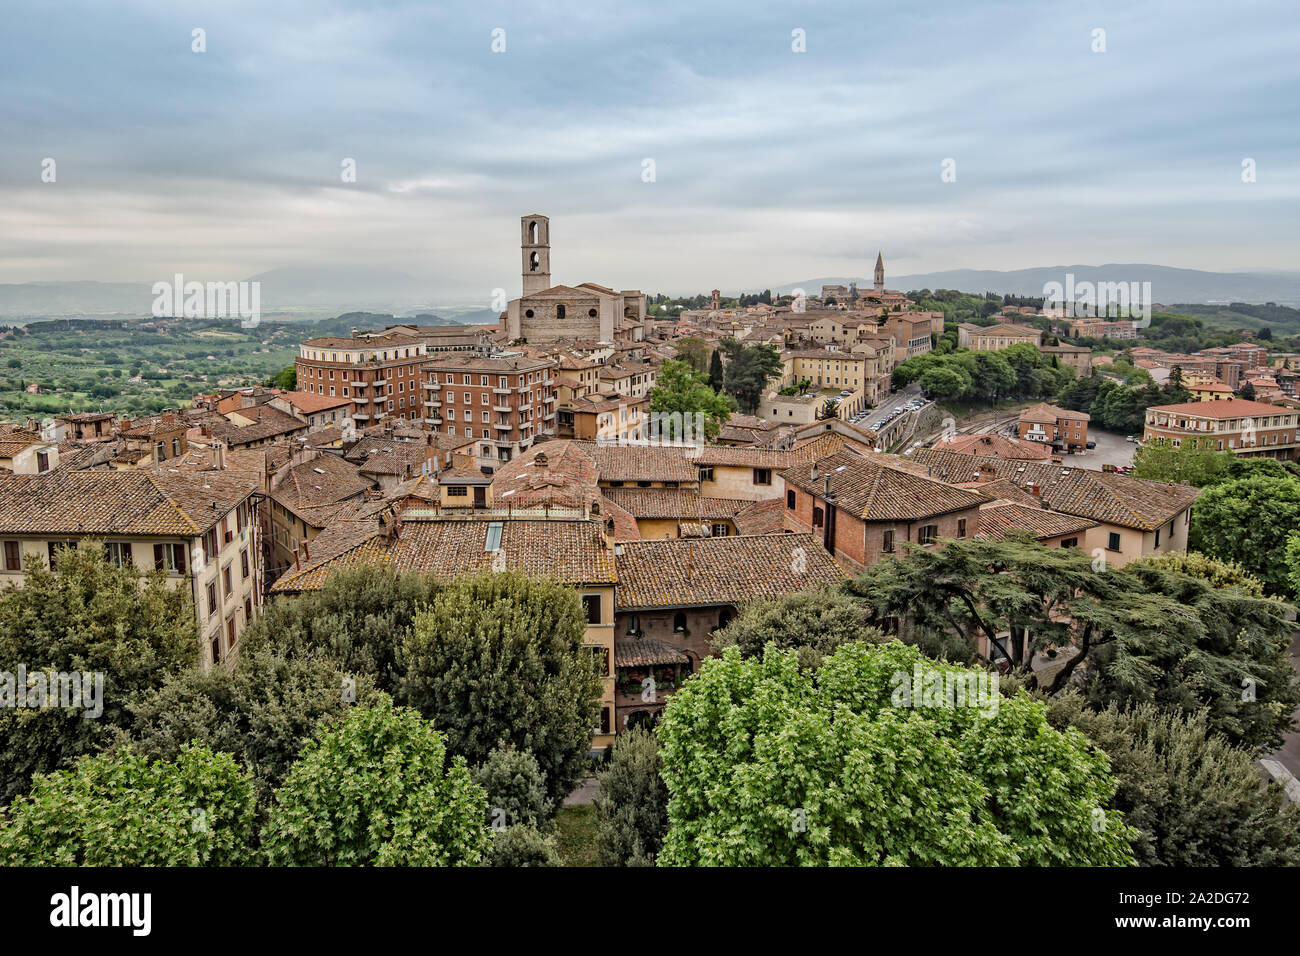 Perugia is a lively medieval walled hill town. View of the Basilica of San Domenico with medieval houses in Perugia historic quarter, Umbria, Italy Stock Photo